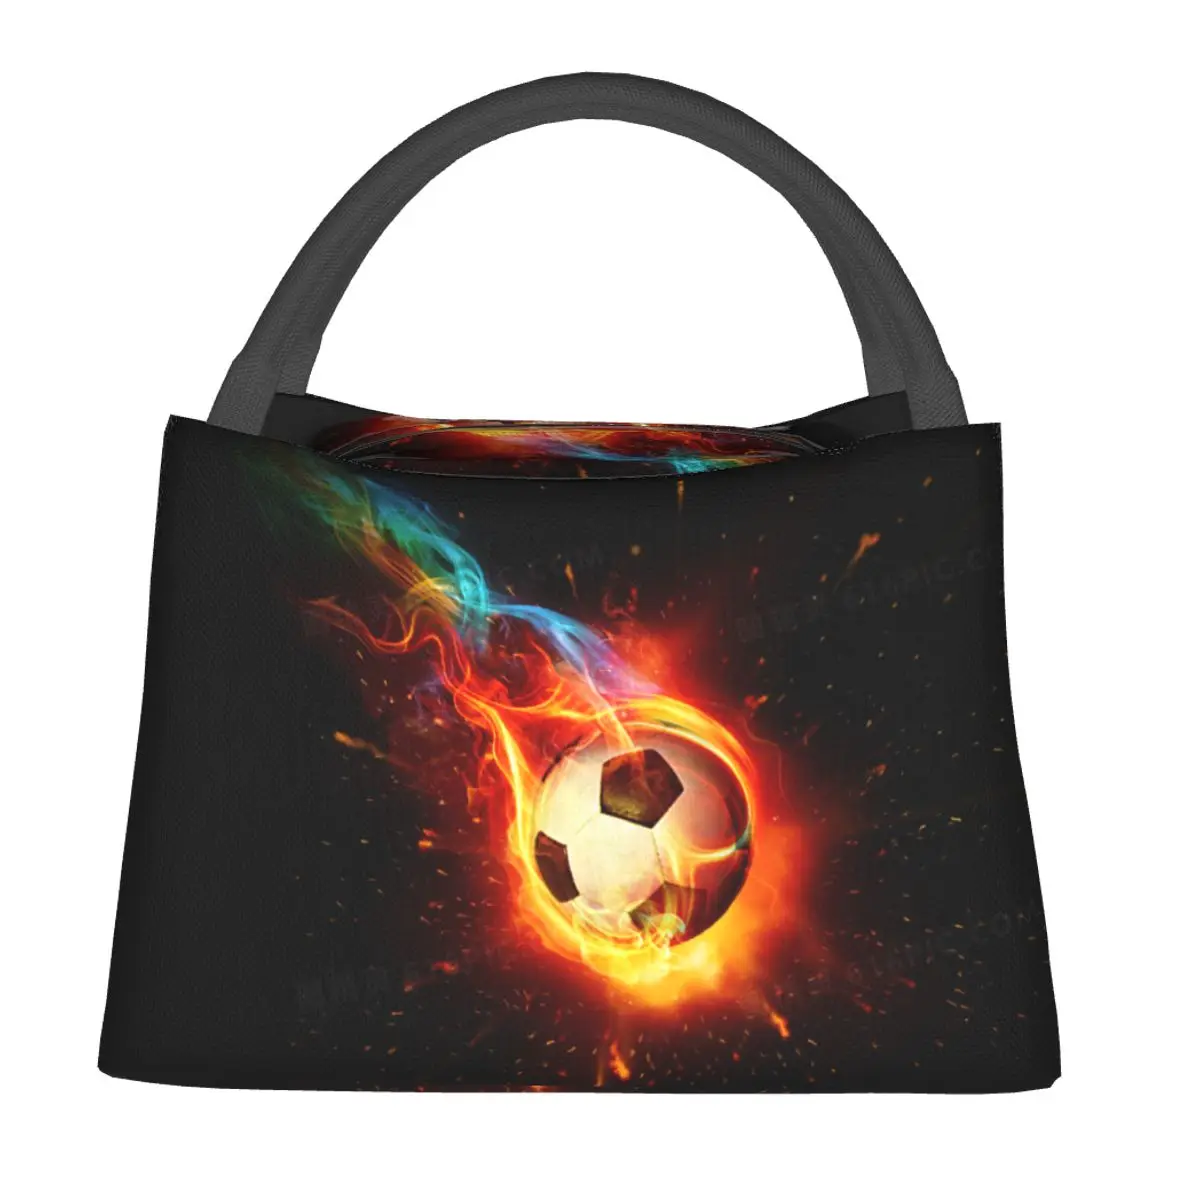 

Soccer Soccer Ball Lunch Bag Football Sport Convenient Lunch Box Office Designer Cooler Bag Leisure Oxford Thermal Tote Handbags